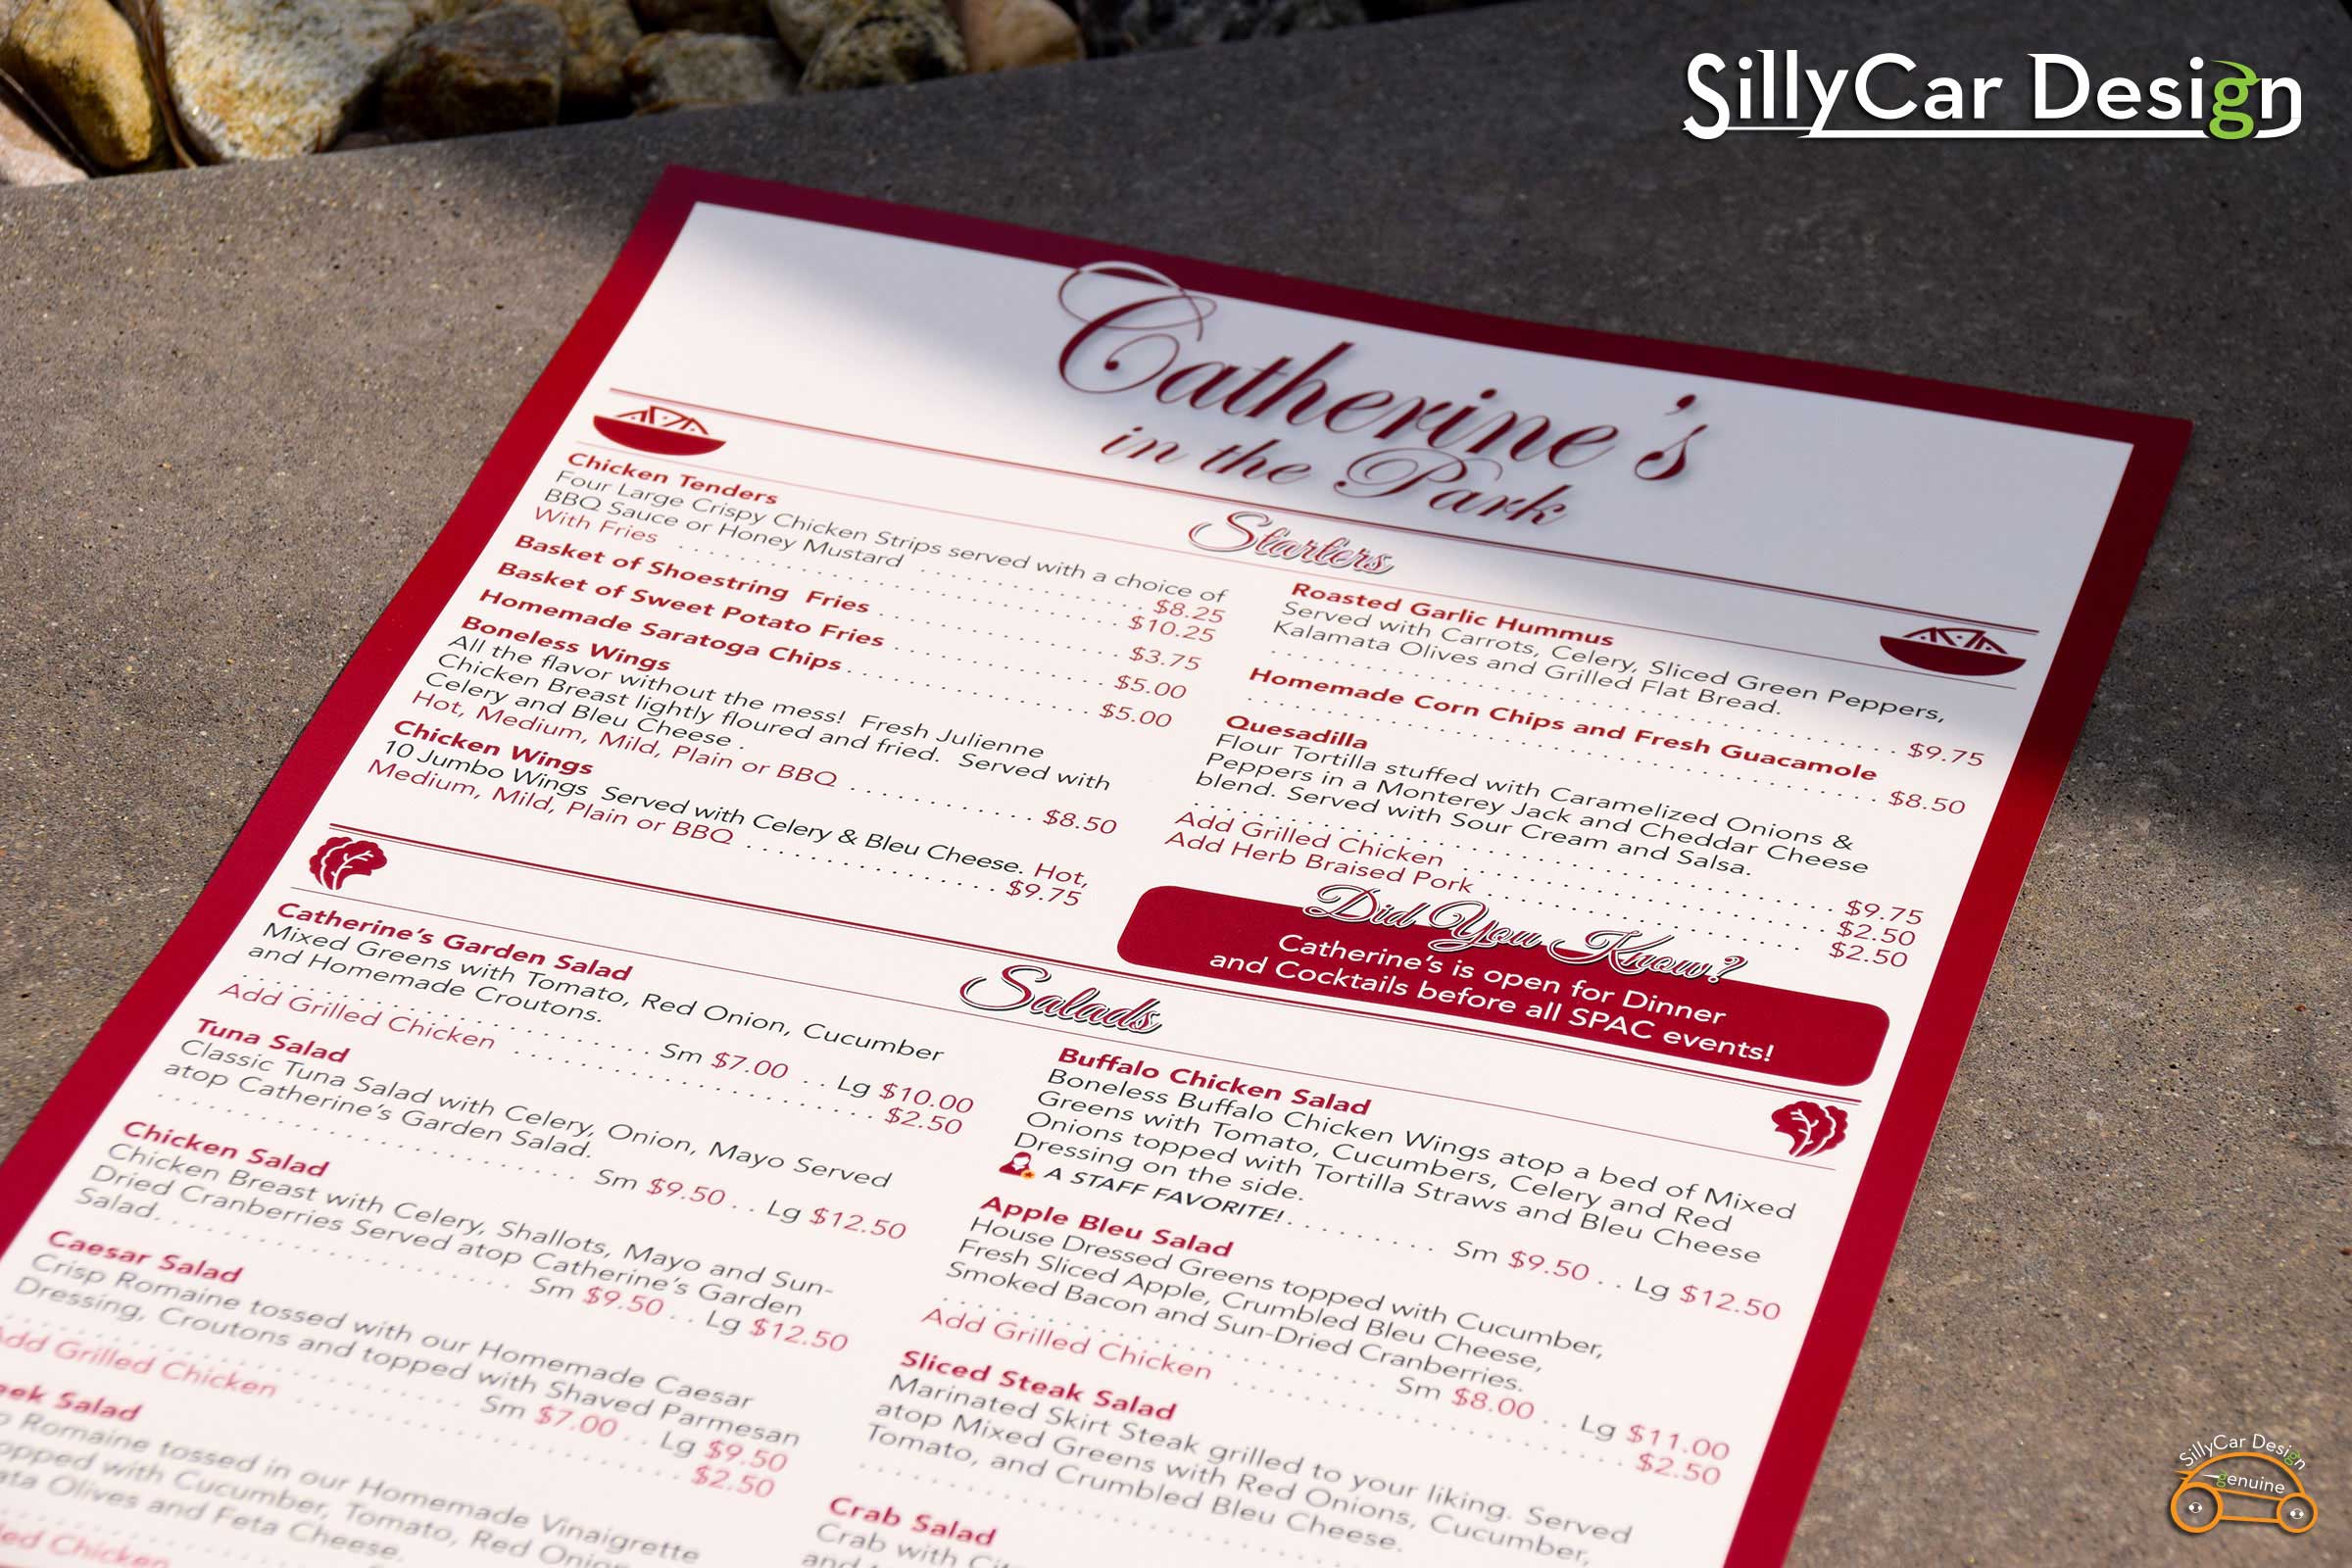 Image of Saratoga Spa Golf waterproof menu for Catherine's in the Park restaurant.